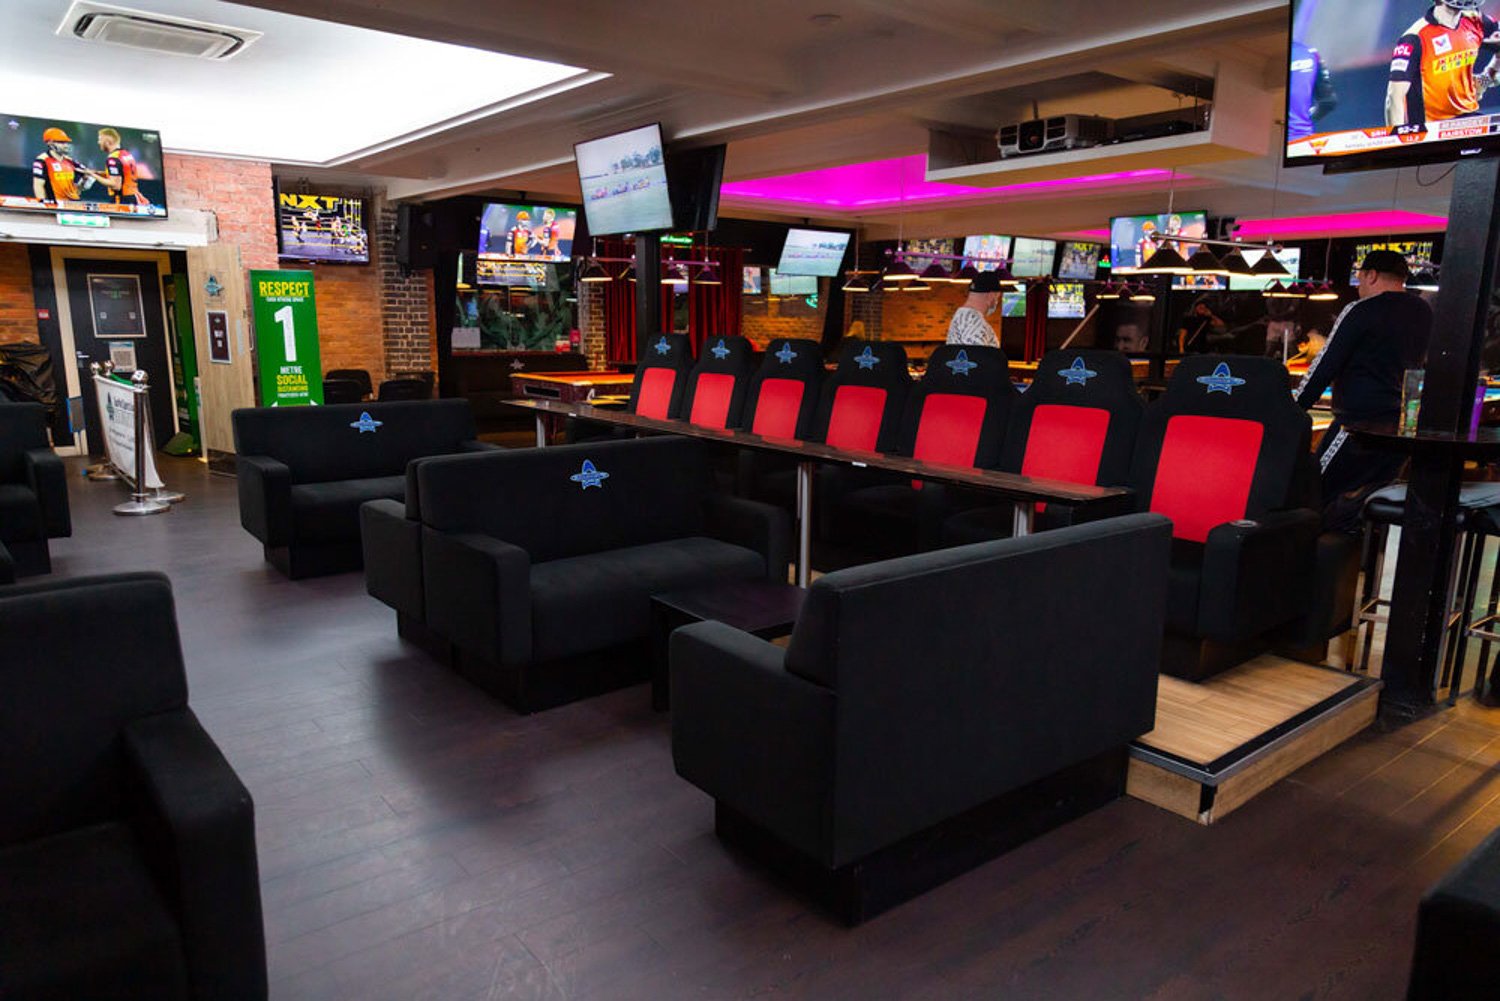 Sharkeys_Sports_Bar_Bournemouth_Live_Sports_Poole_Snooker_Table_Tennis_VIP_Rooms_Consoles-25.jpg